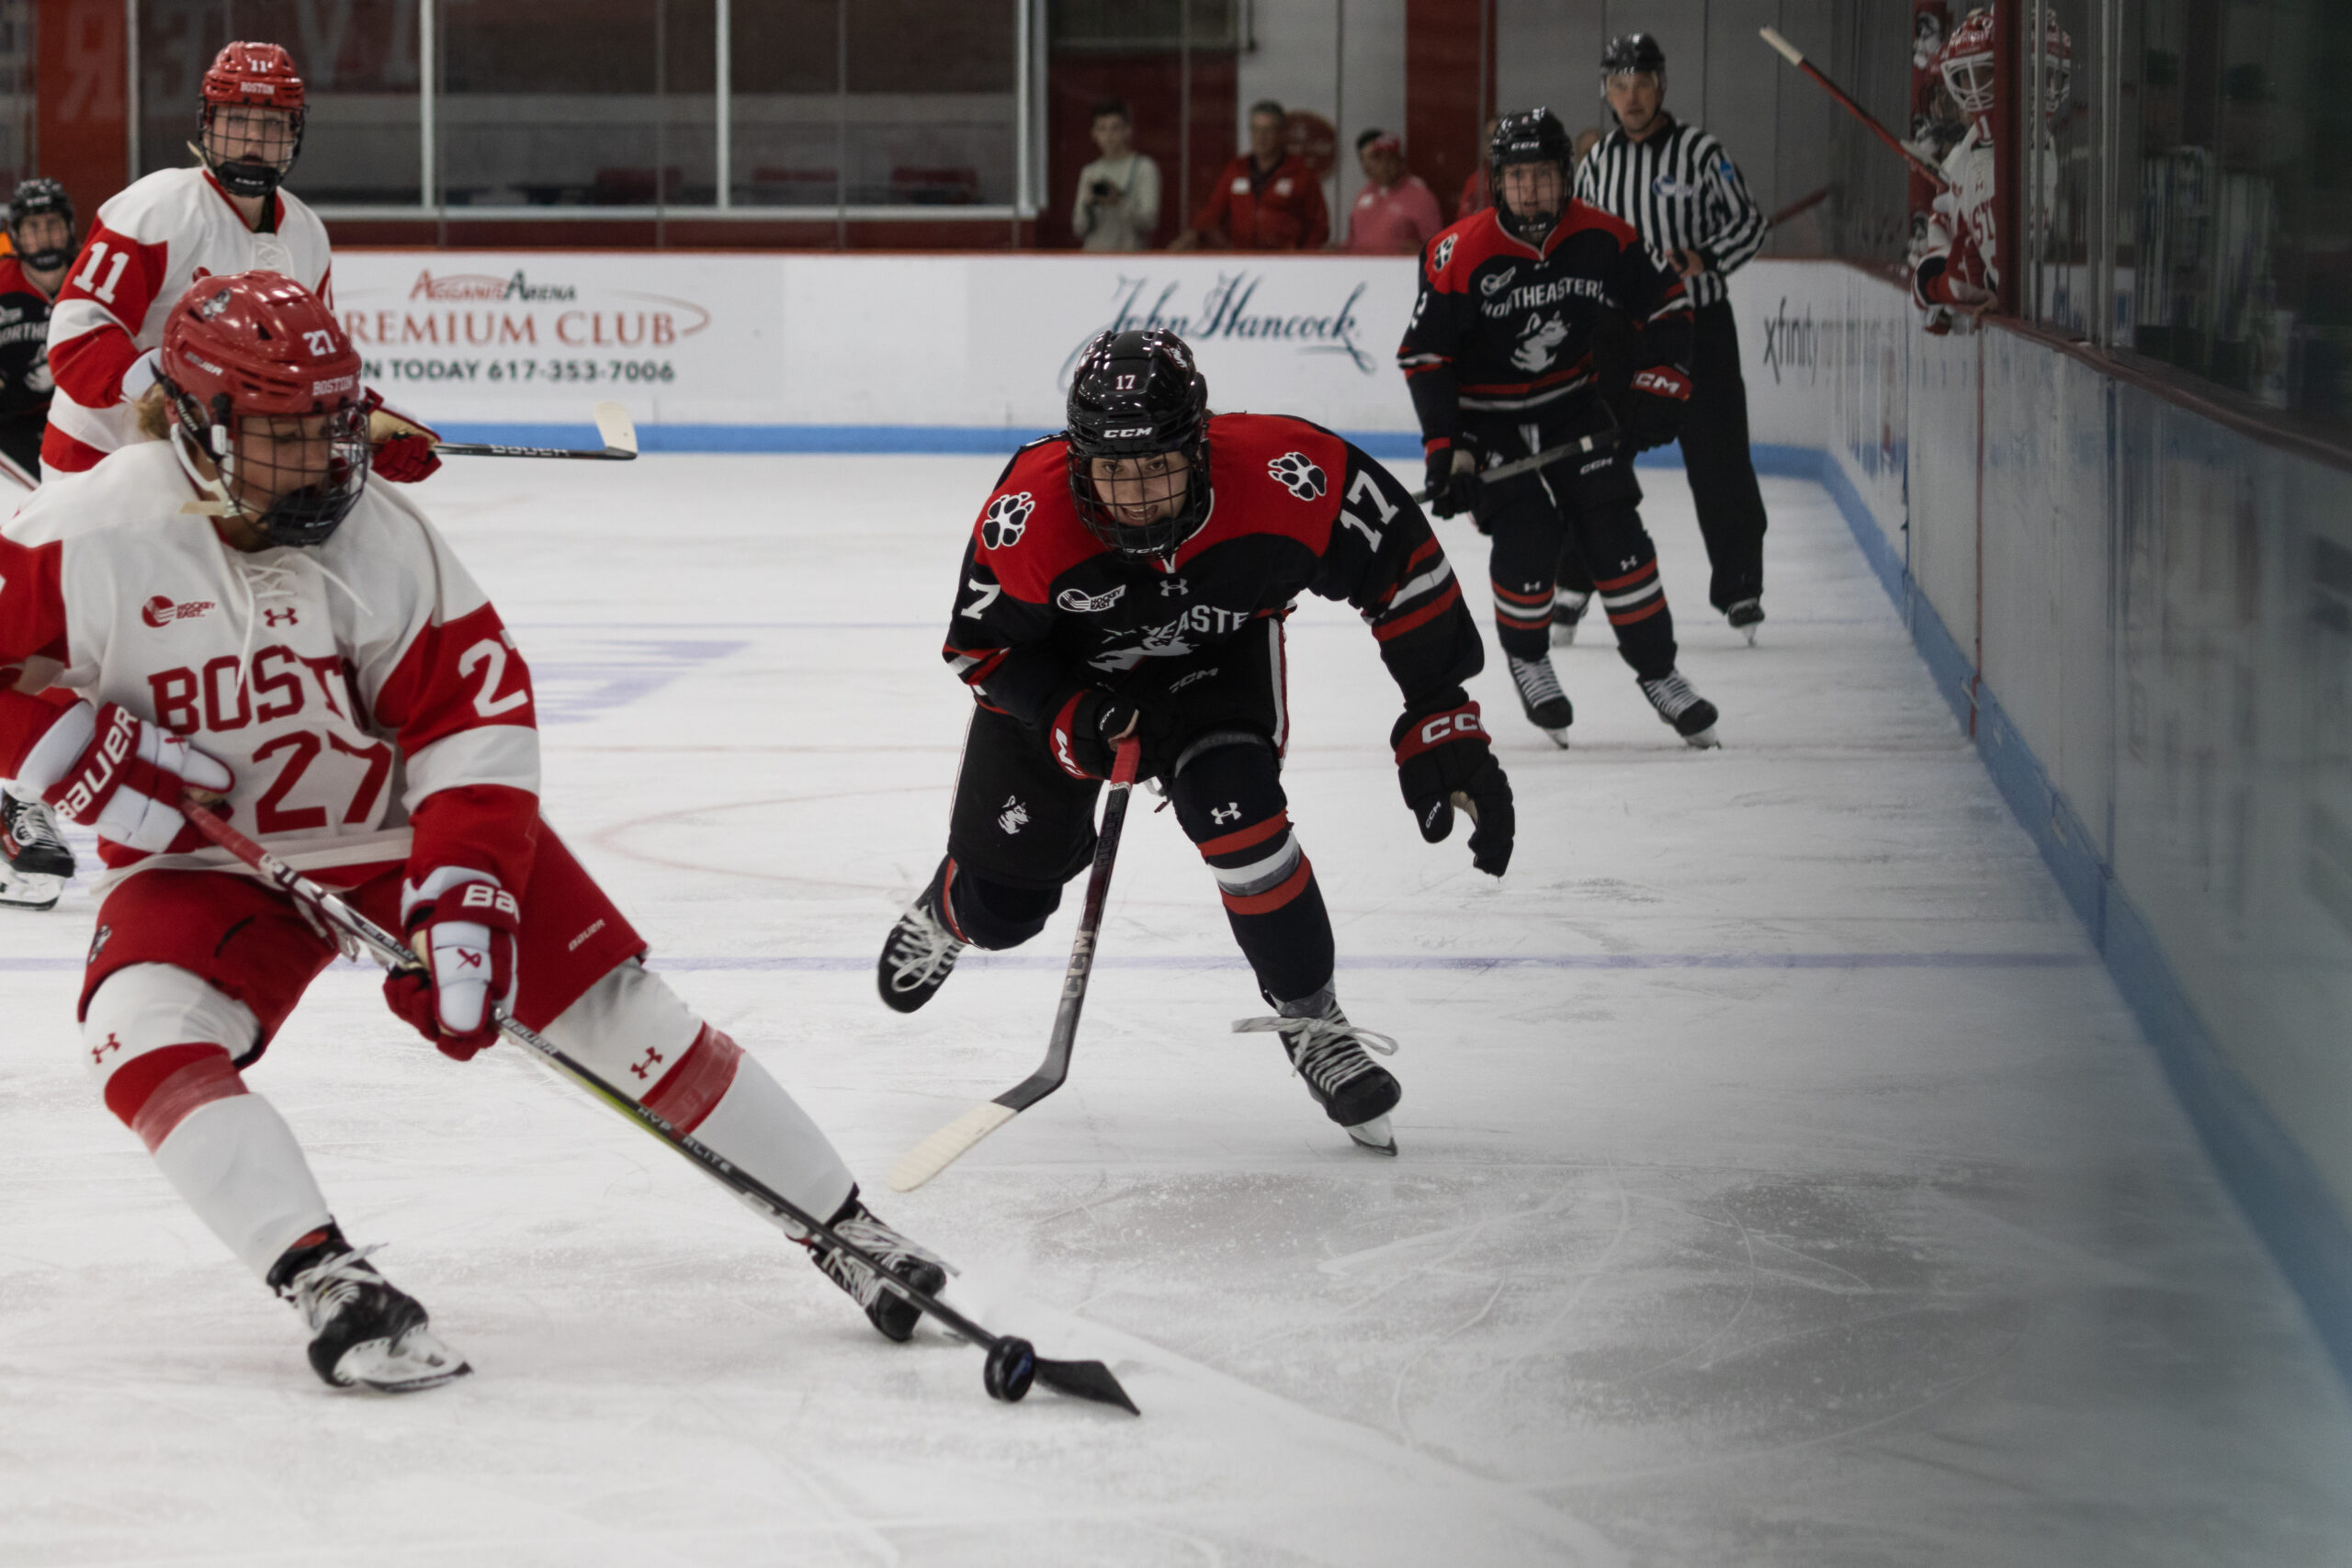 The Terrier Hockey Fan Blog: Catching up: Grier tabbed as Devils